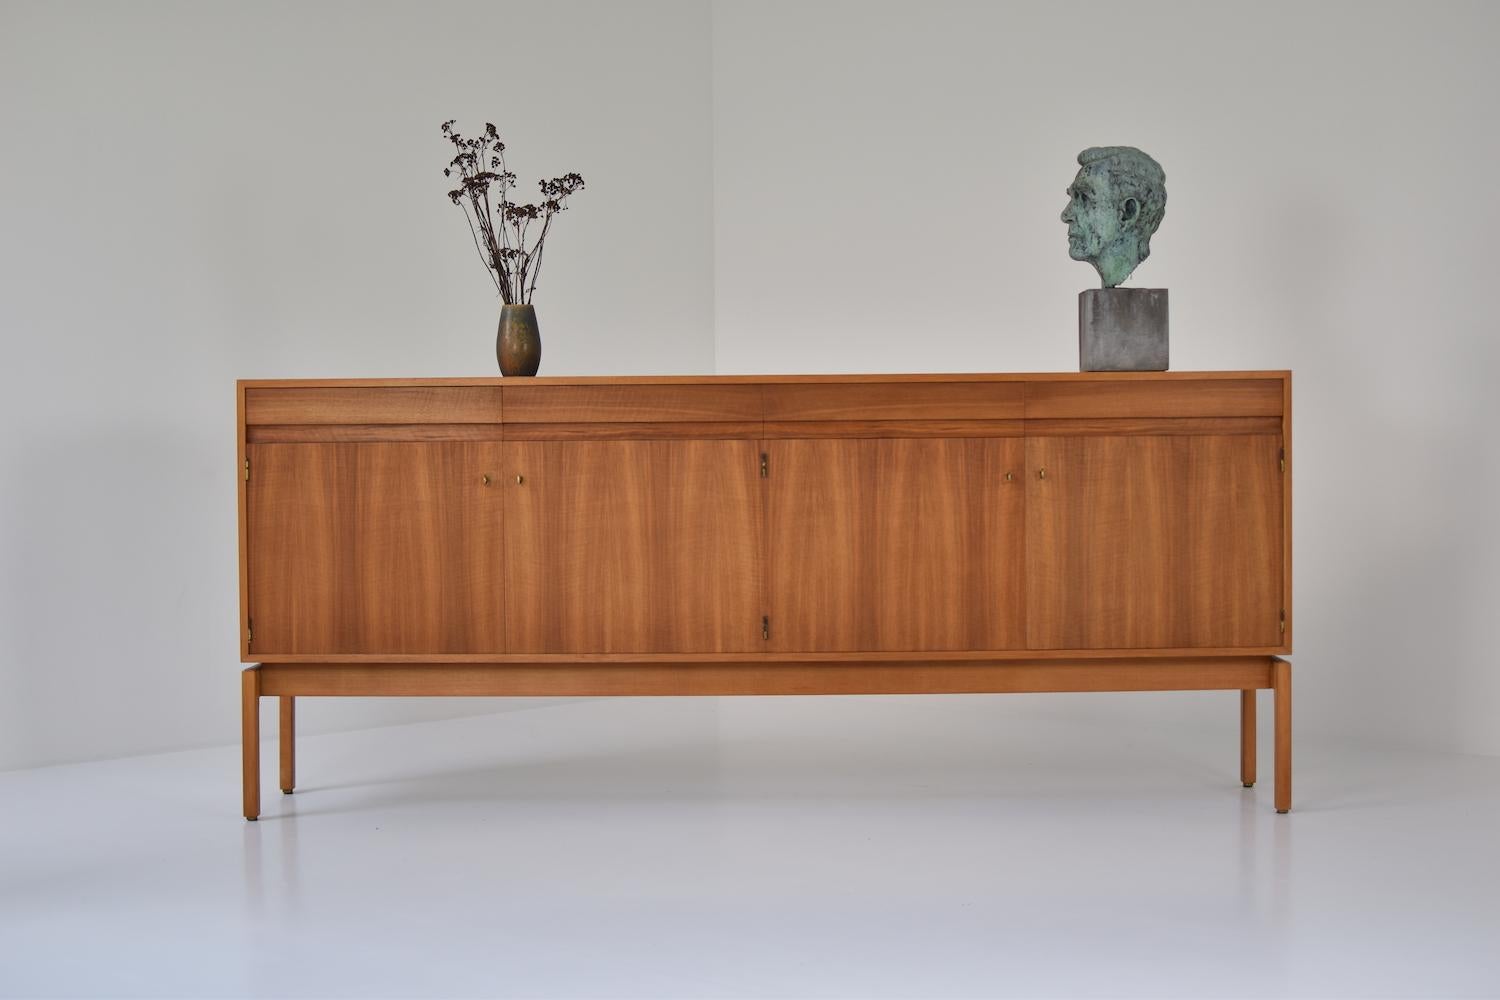 Sideboard in walnut by Jos de Mey for Van den Berghe-Pauvers, Belgium, 1960s. This credenza features four large doors and four drawers with hand casted brass handles. Part of the beautiful abstract series! Fully restored. Labeled.